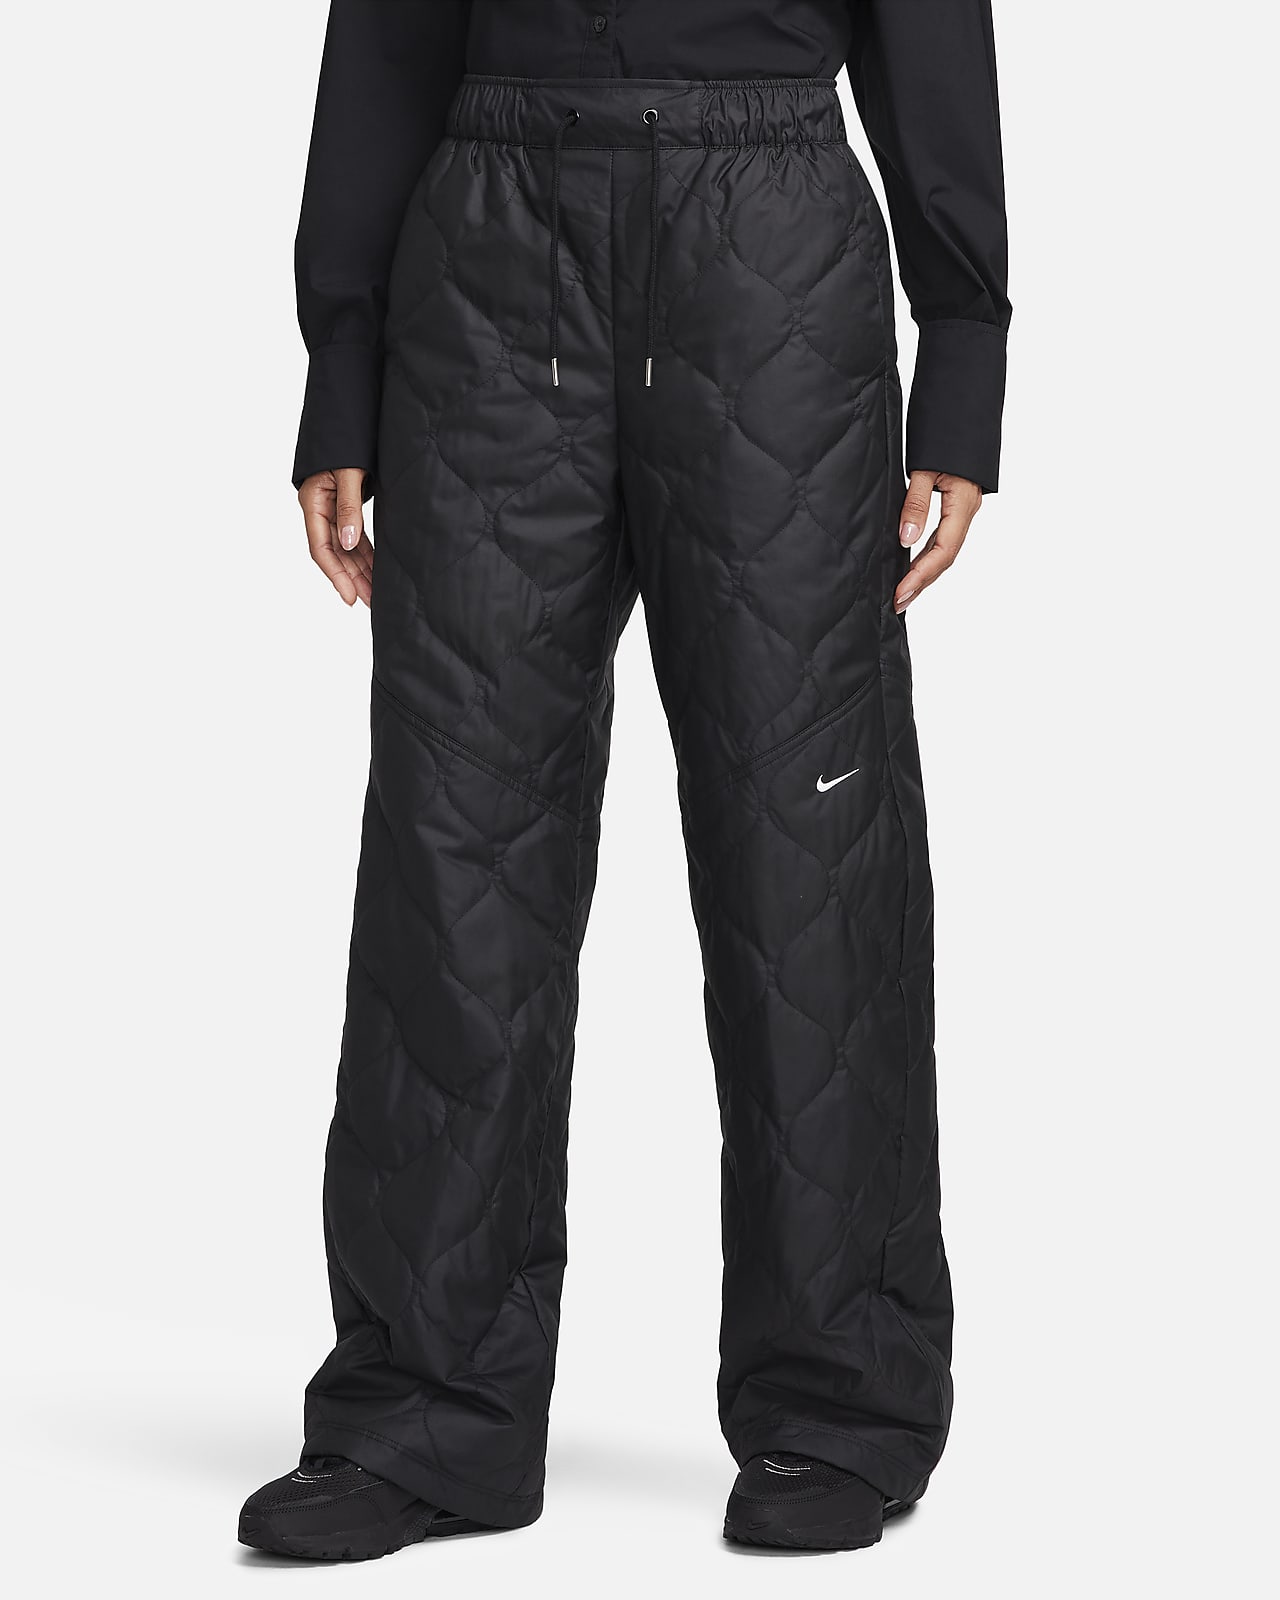 https://static.nike.com/a/images/t_PDP_1280_v1/f_auto,q_auto:eco/3a73f321-5c8d-4895-a01a-0697b61006c8/sportswear-essential-high-waisted-open-hem-quilted-trousers-2mpCf1.png